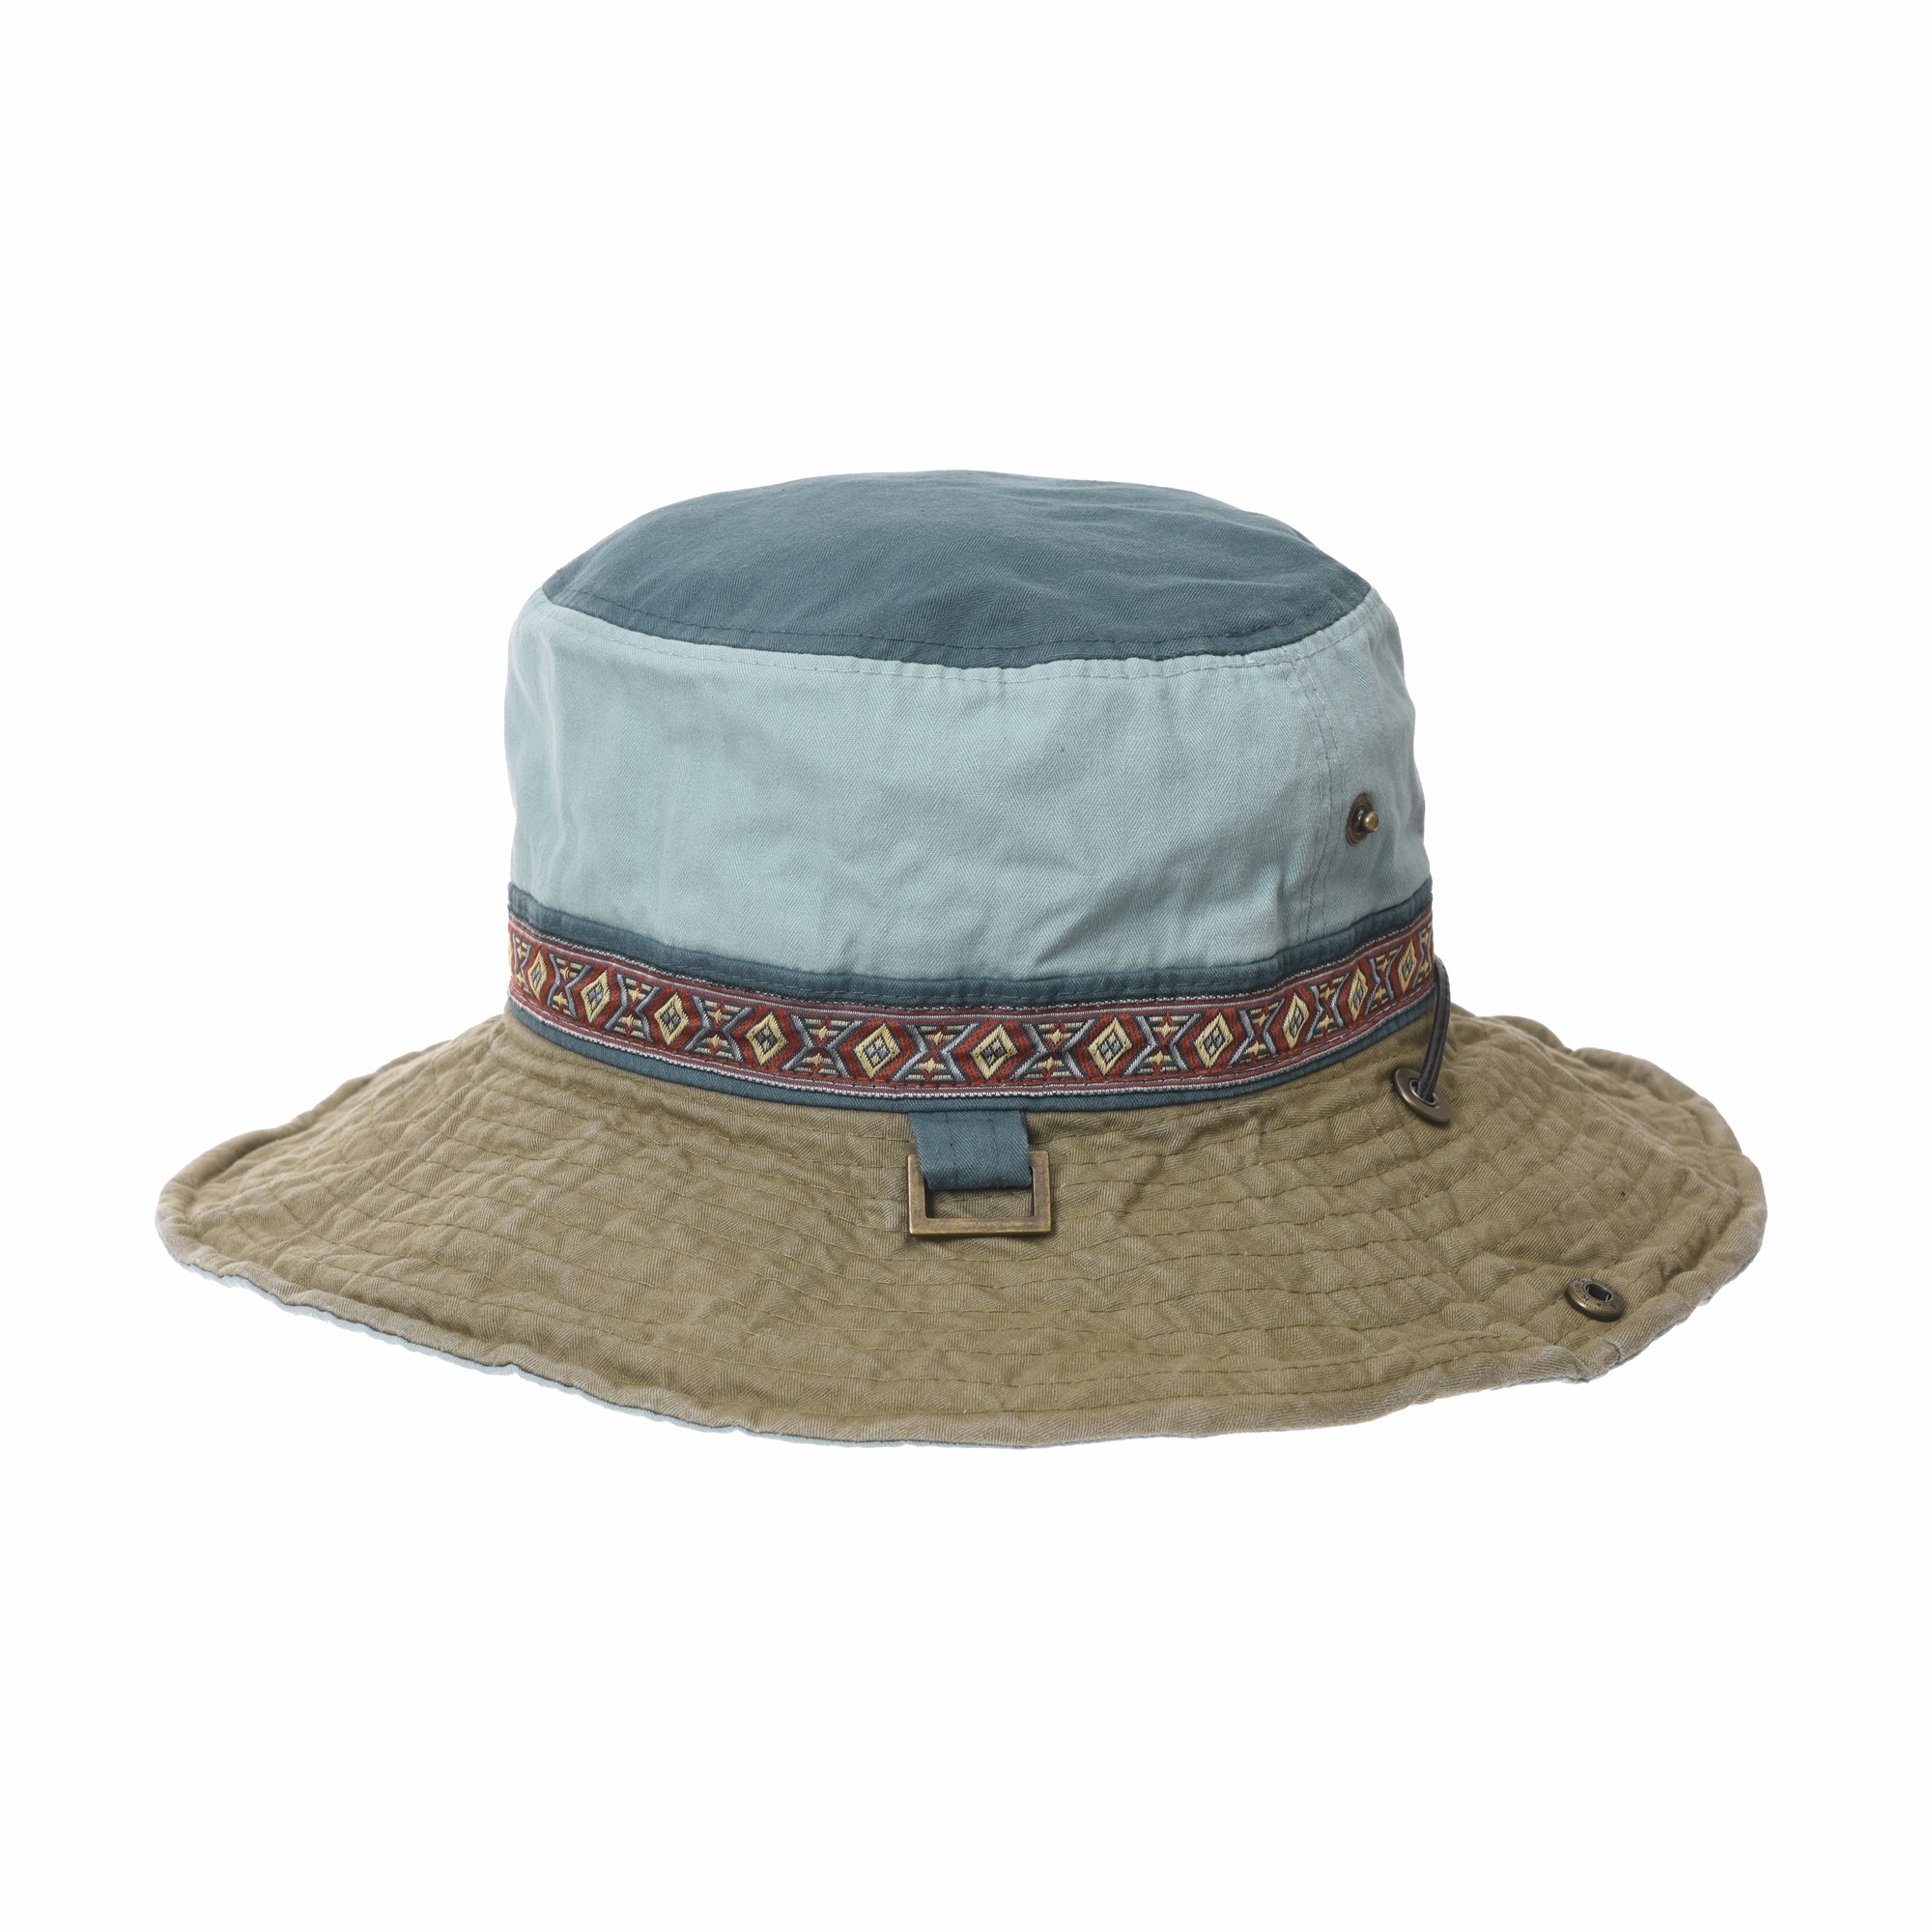 WITHMOONS Boonie Bush Hats Wide Brim Aztec Pattern Side Snap AC8726 | eBay